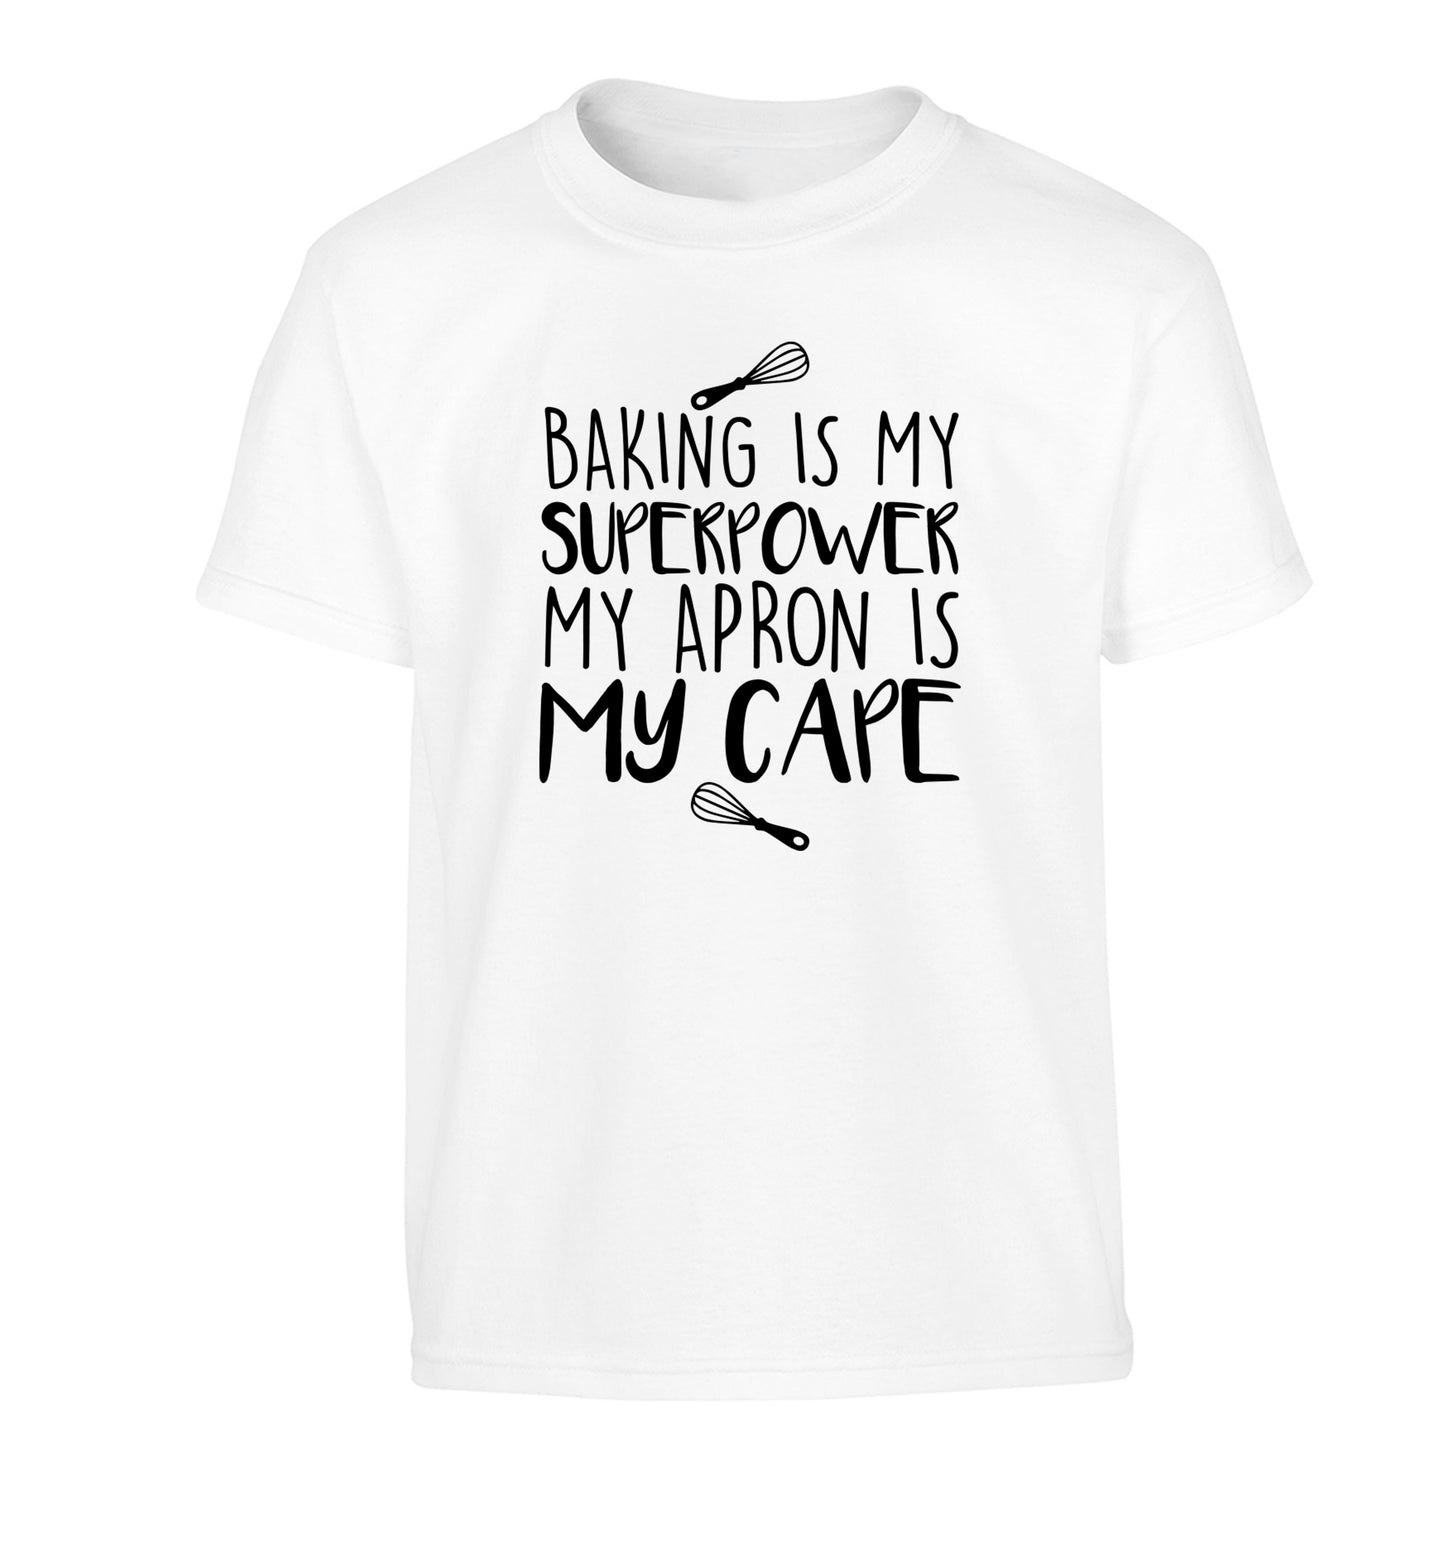 Baking is my superpower my apron is my cape Children's white Tshirt 12-14 Years